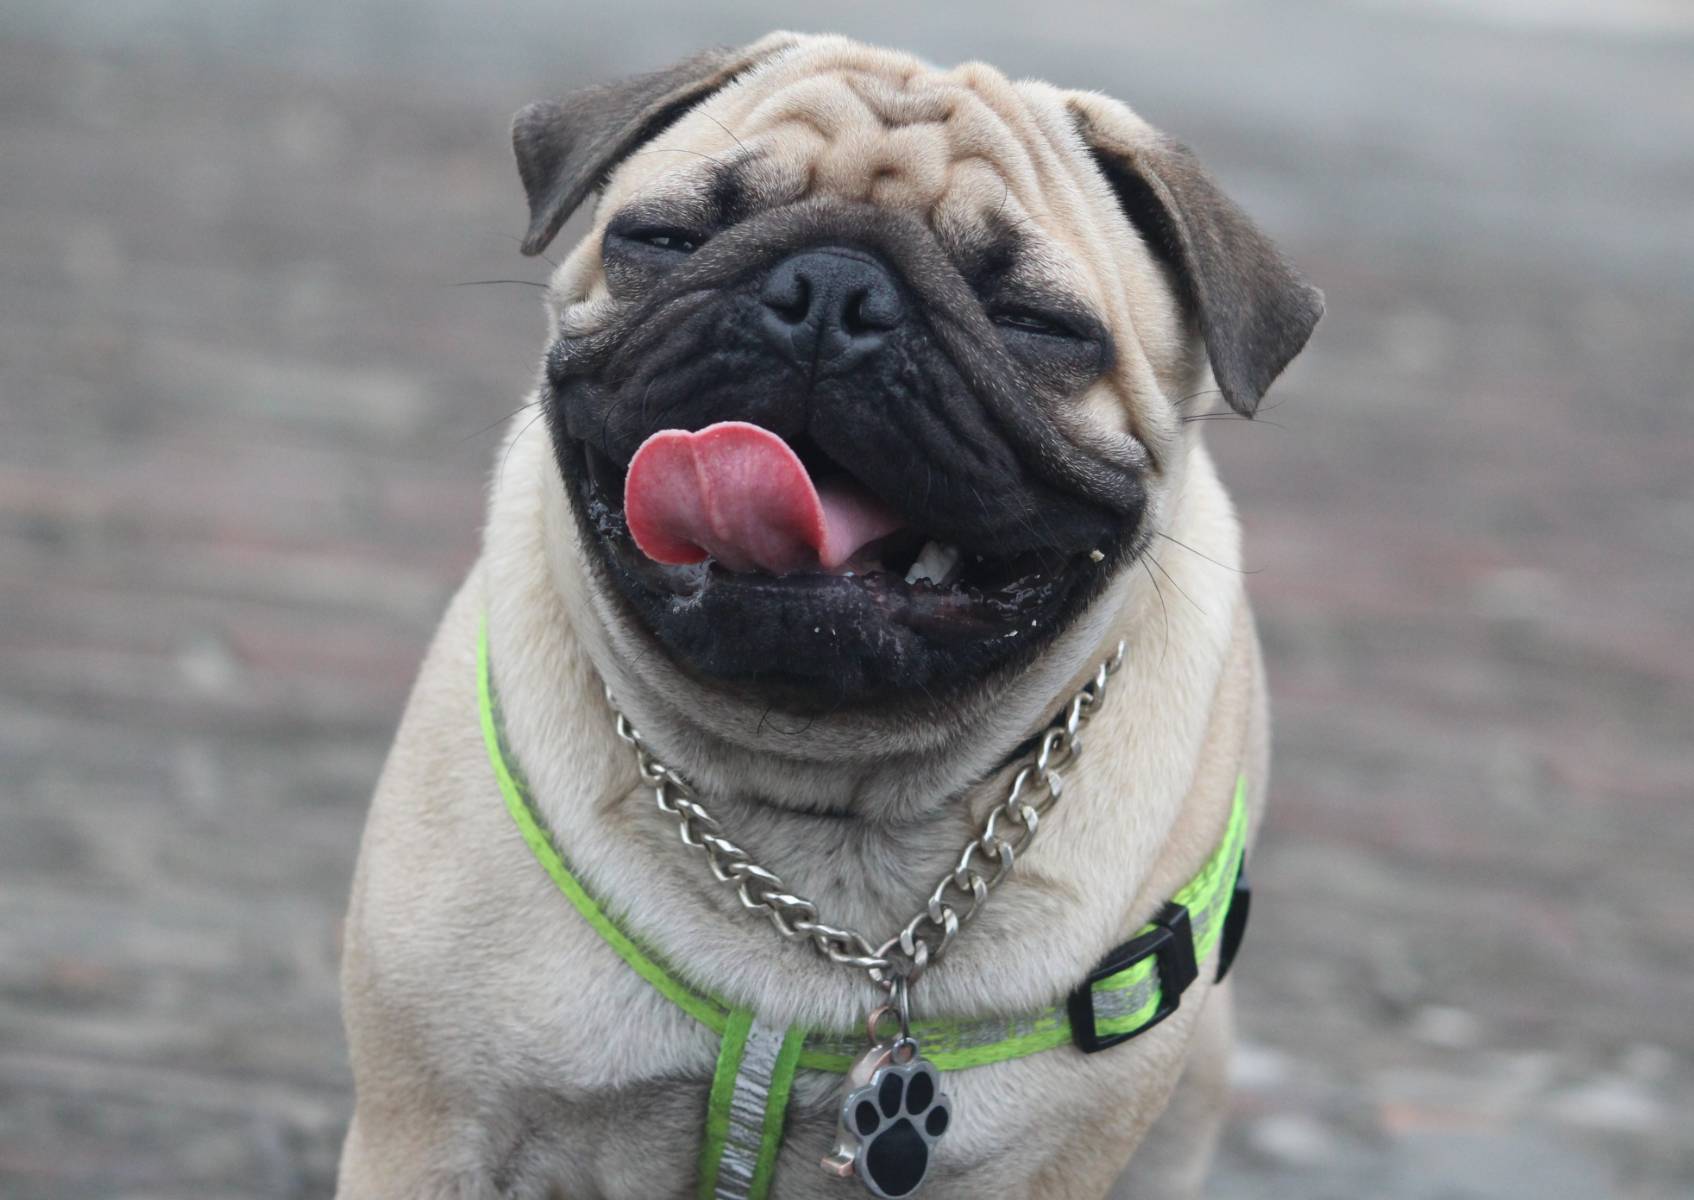 Pug dog on a leash with its tongue sticking out.